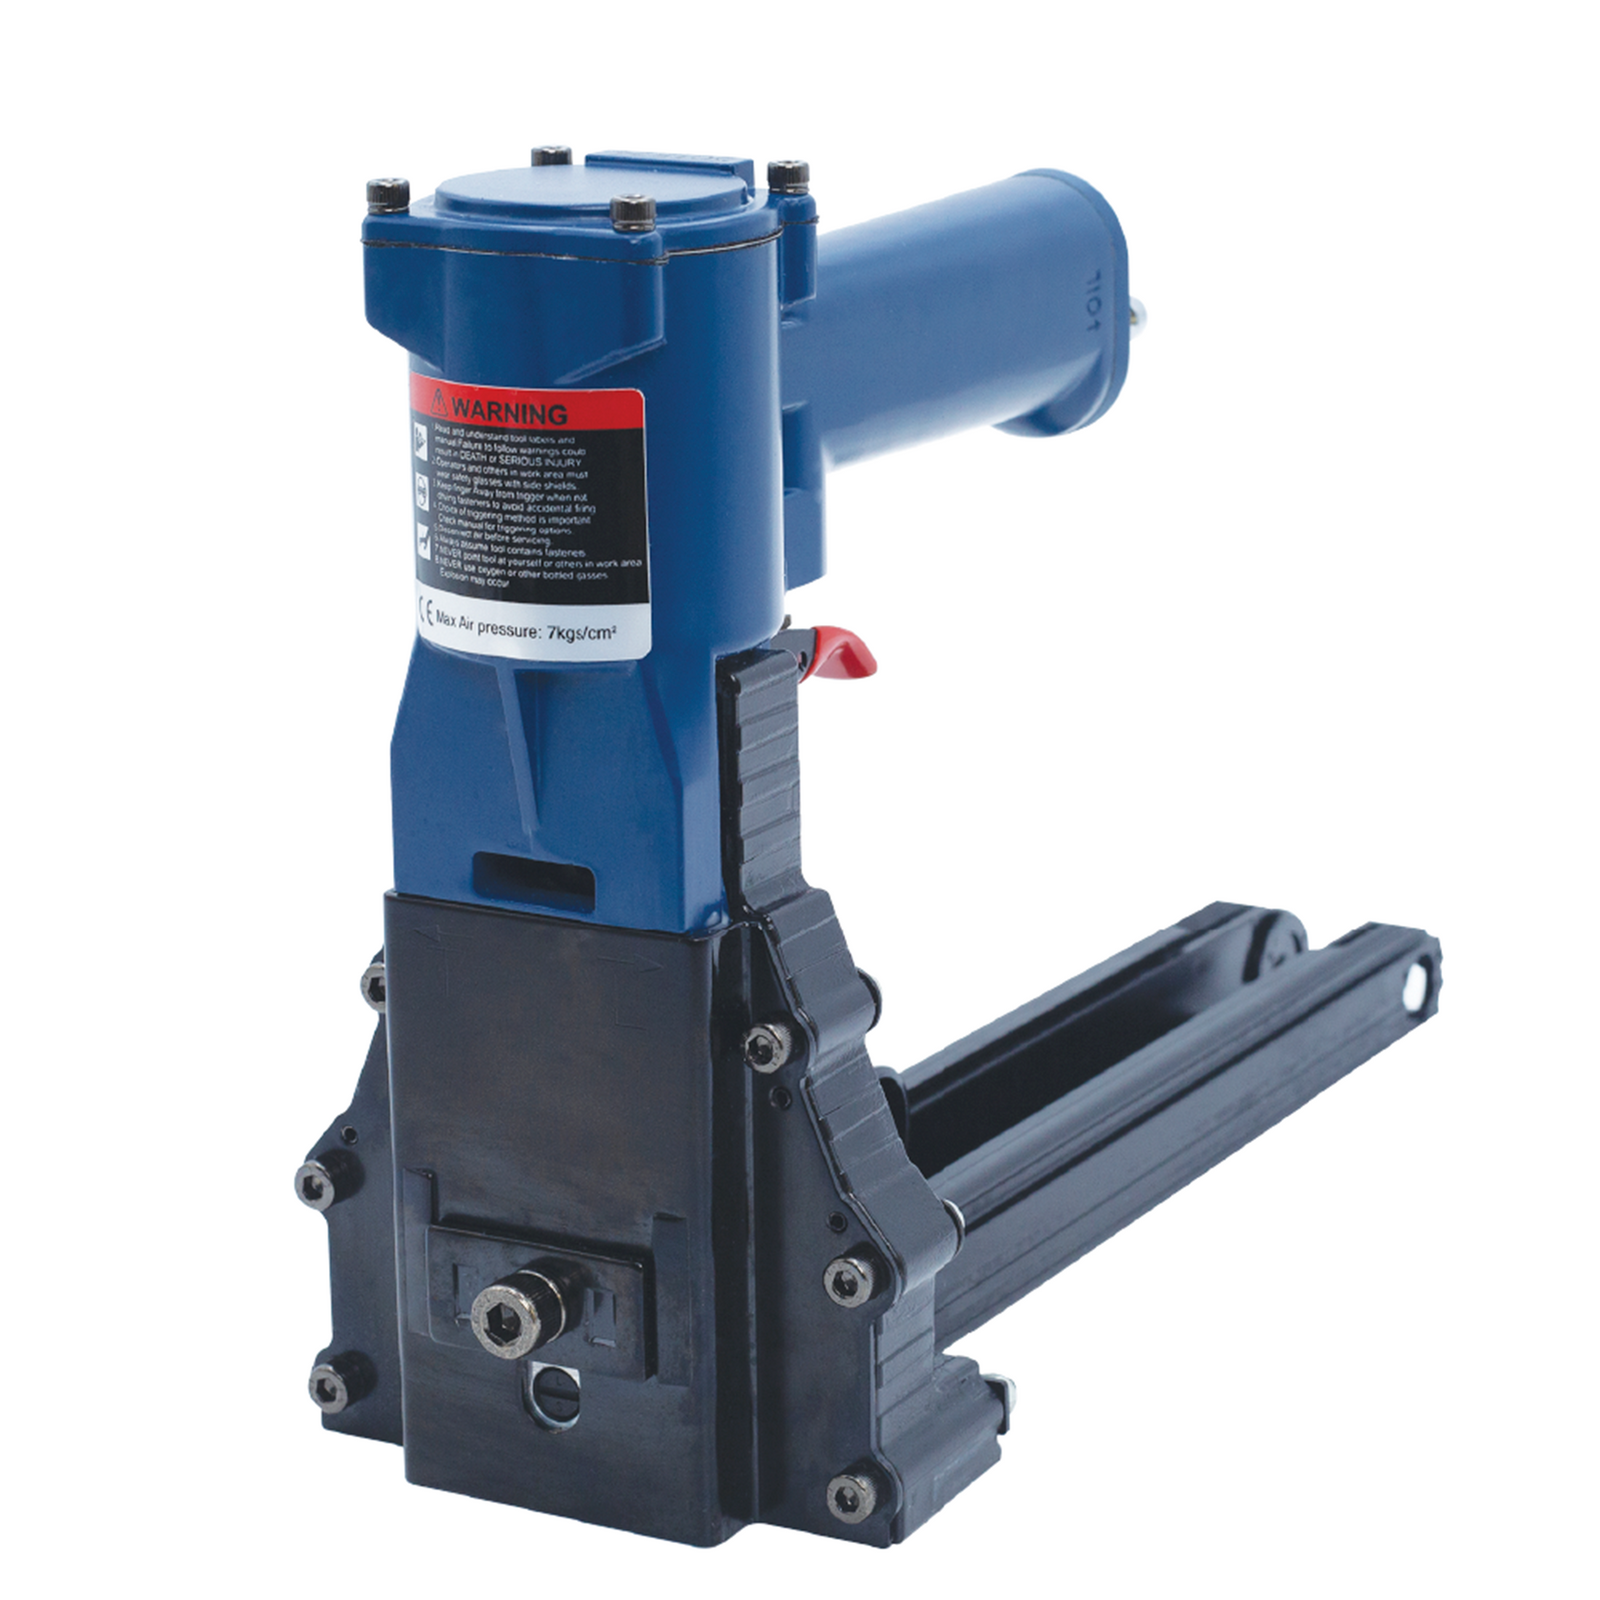 blue and black pneumatic carton stapler gun with red trigger featuring a red/black warning label